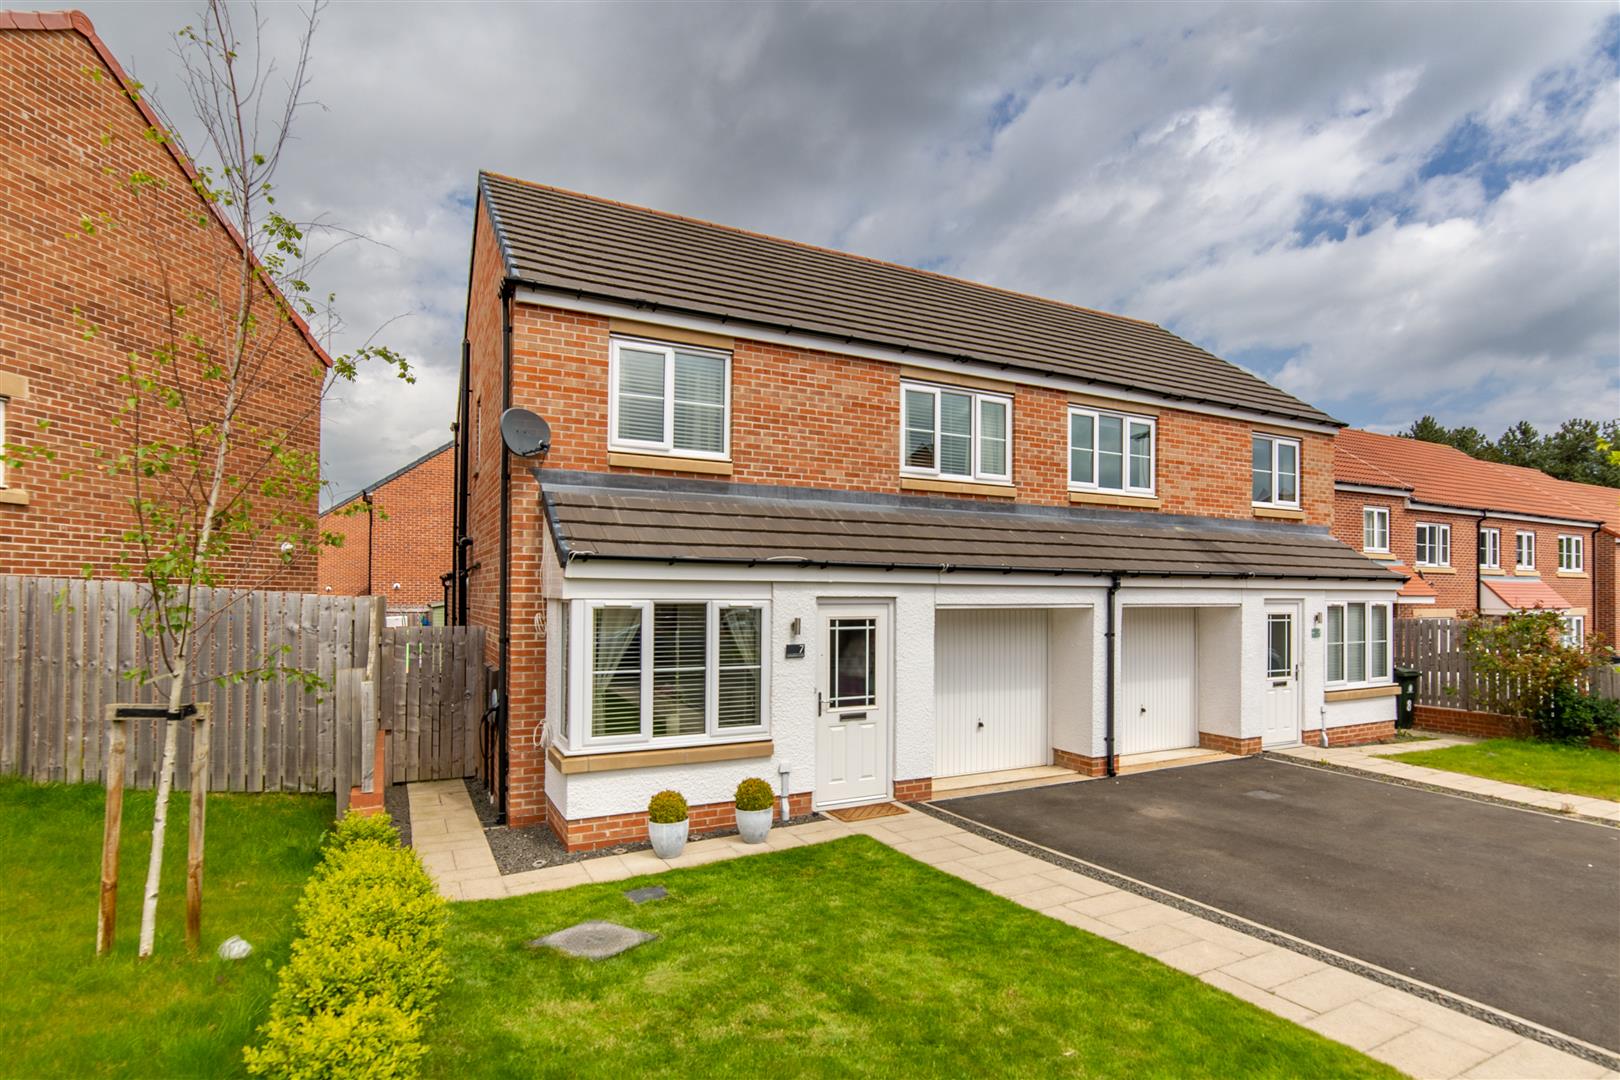 3 bed semi-detached house for sale in Nuthatch Close, Newcastle Upon Tyne, NE13